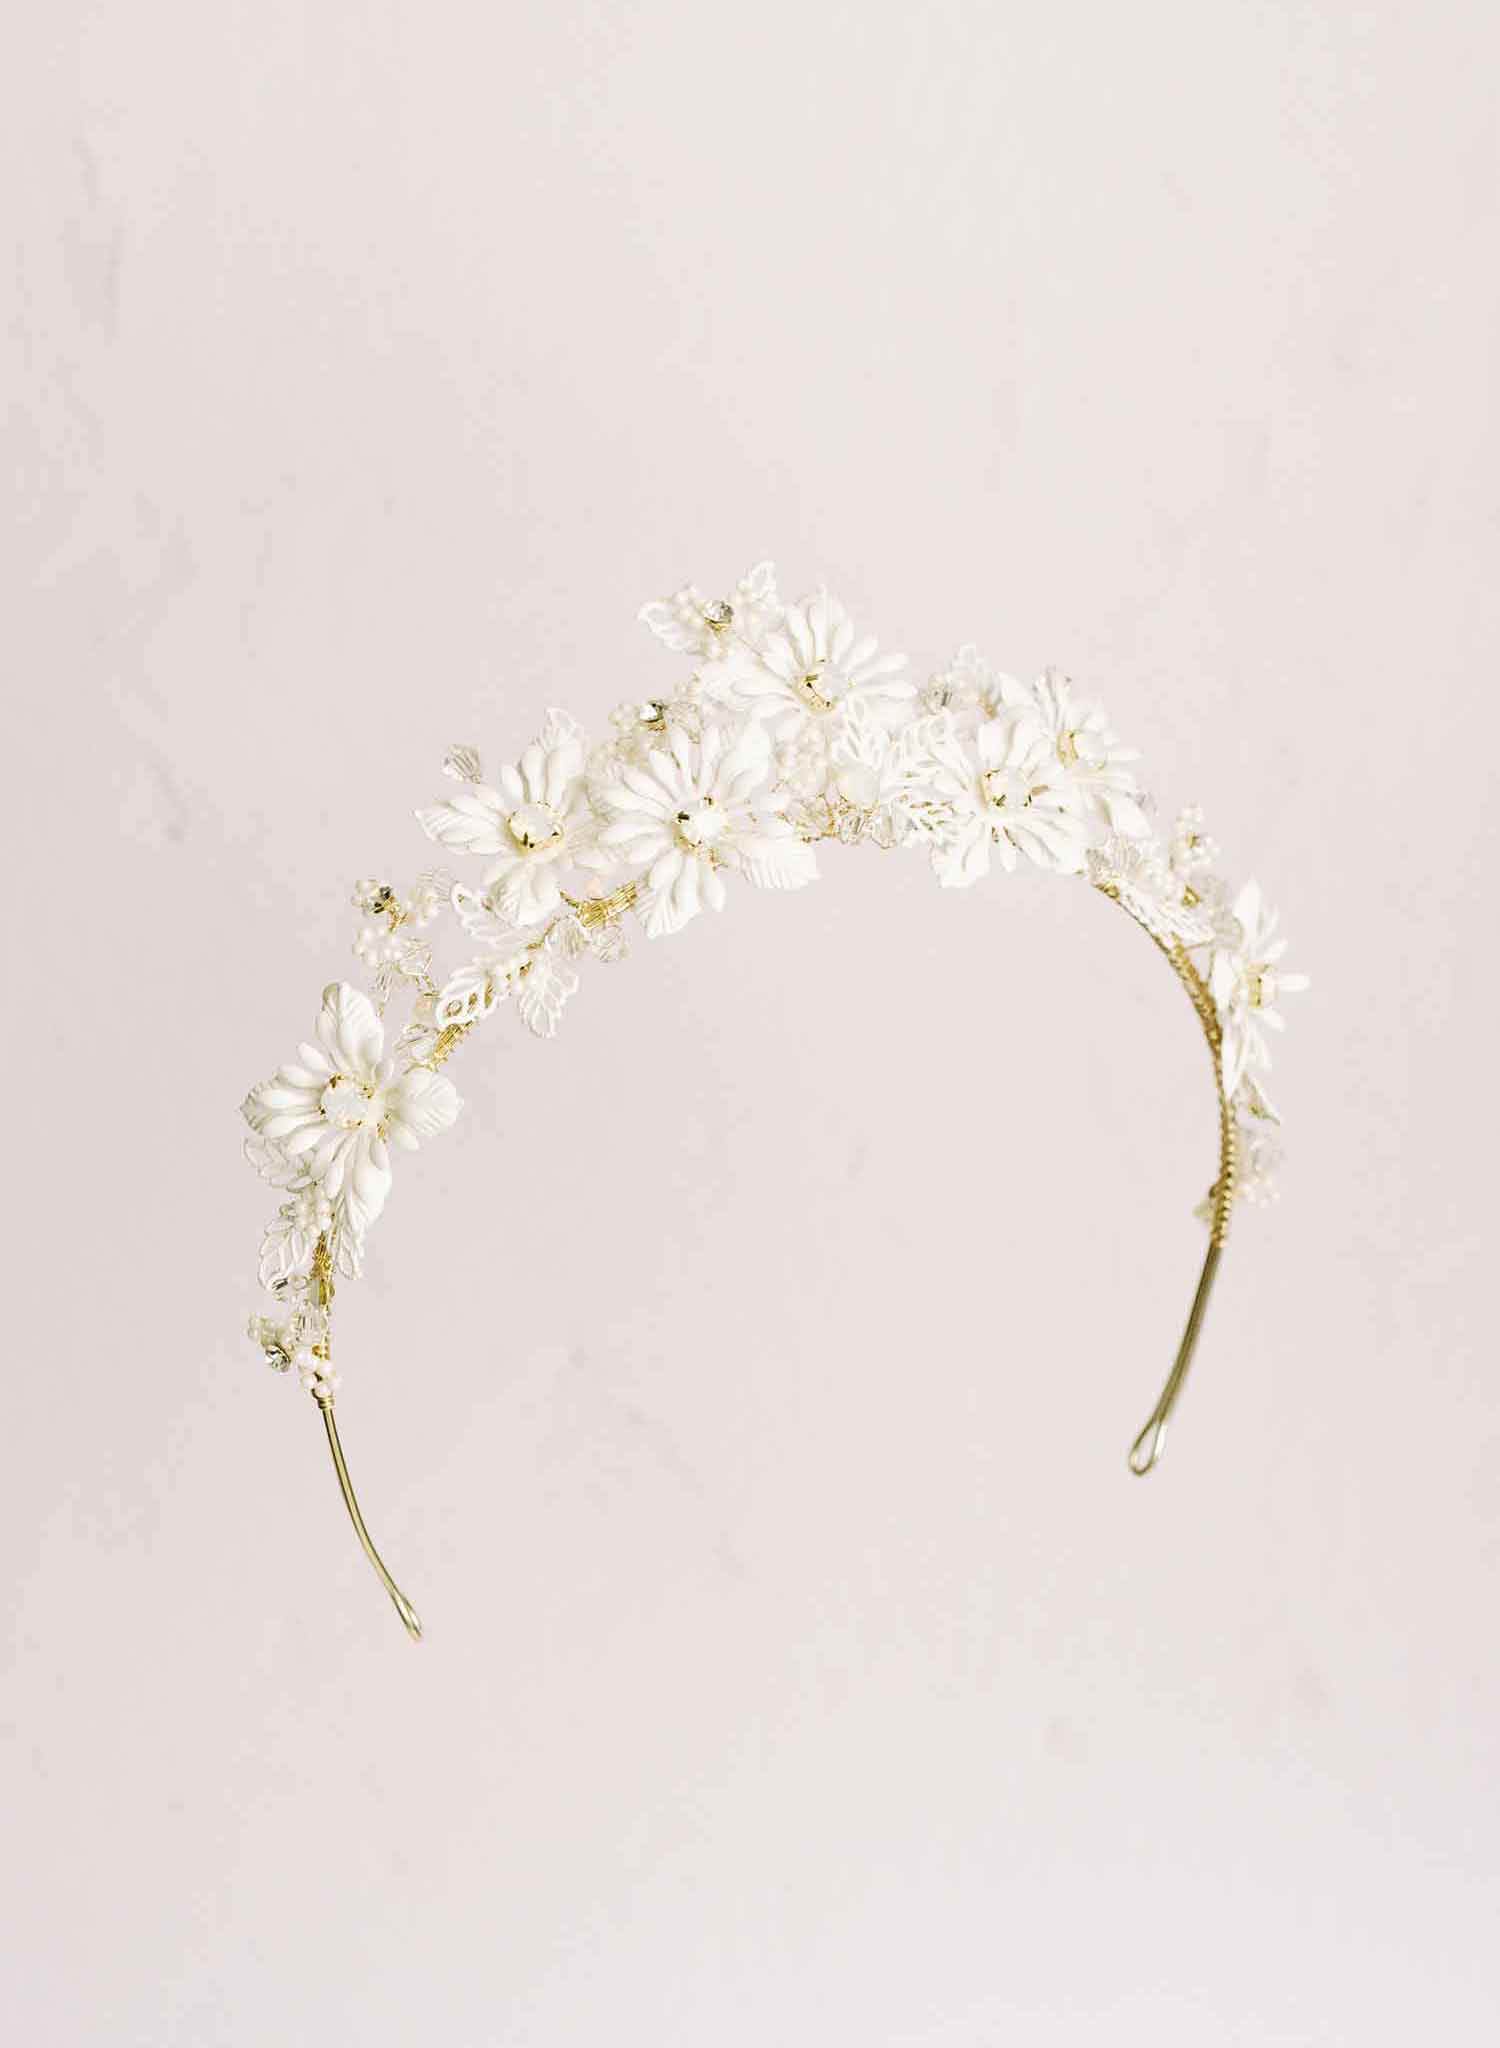 Whimsical forest bride tiara - Style #2143